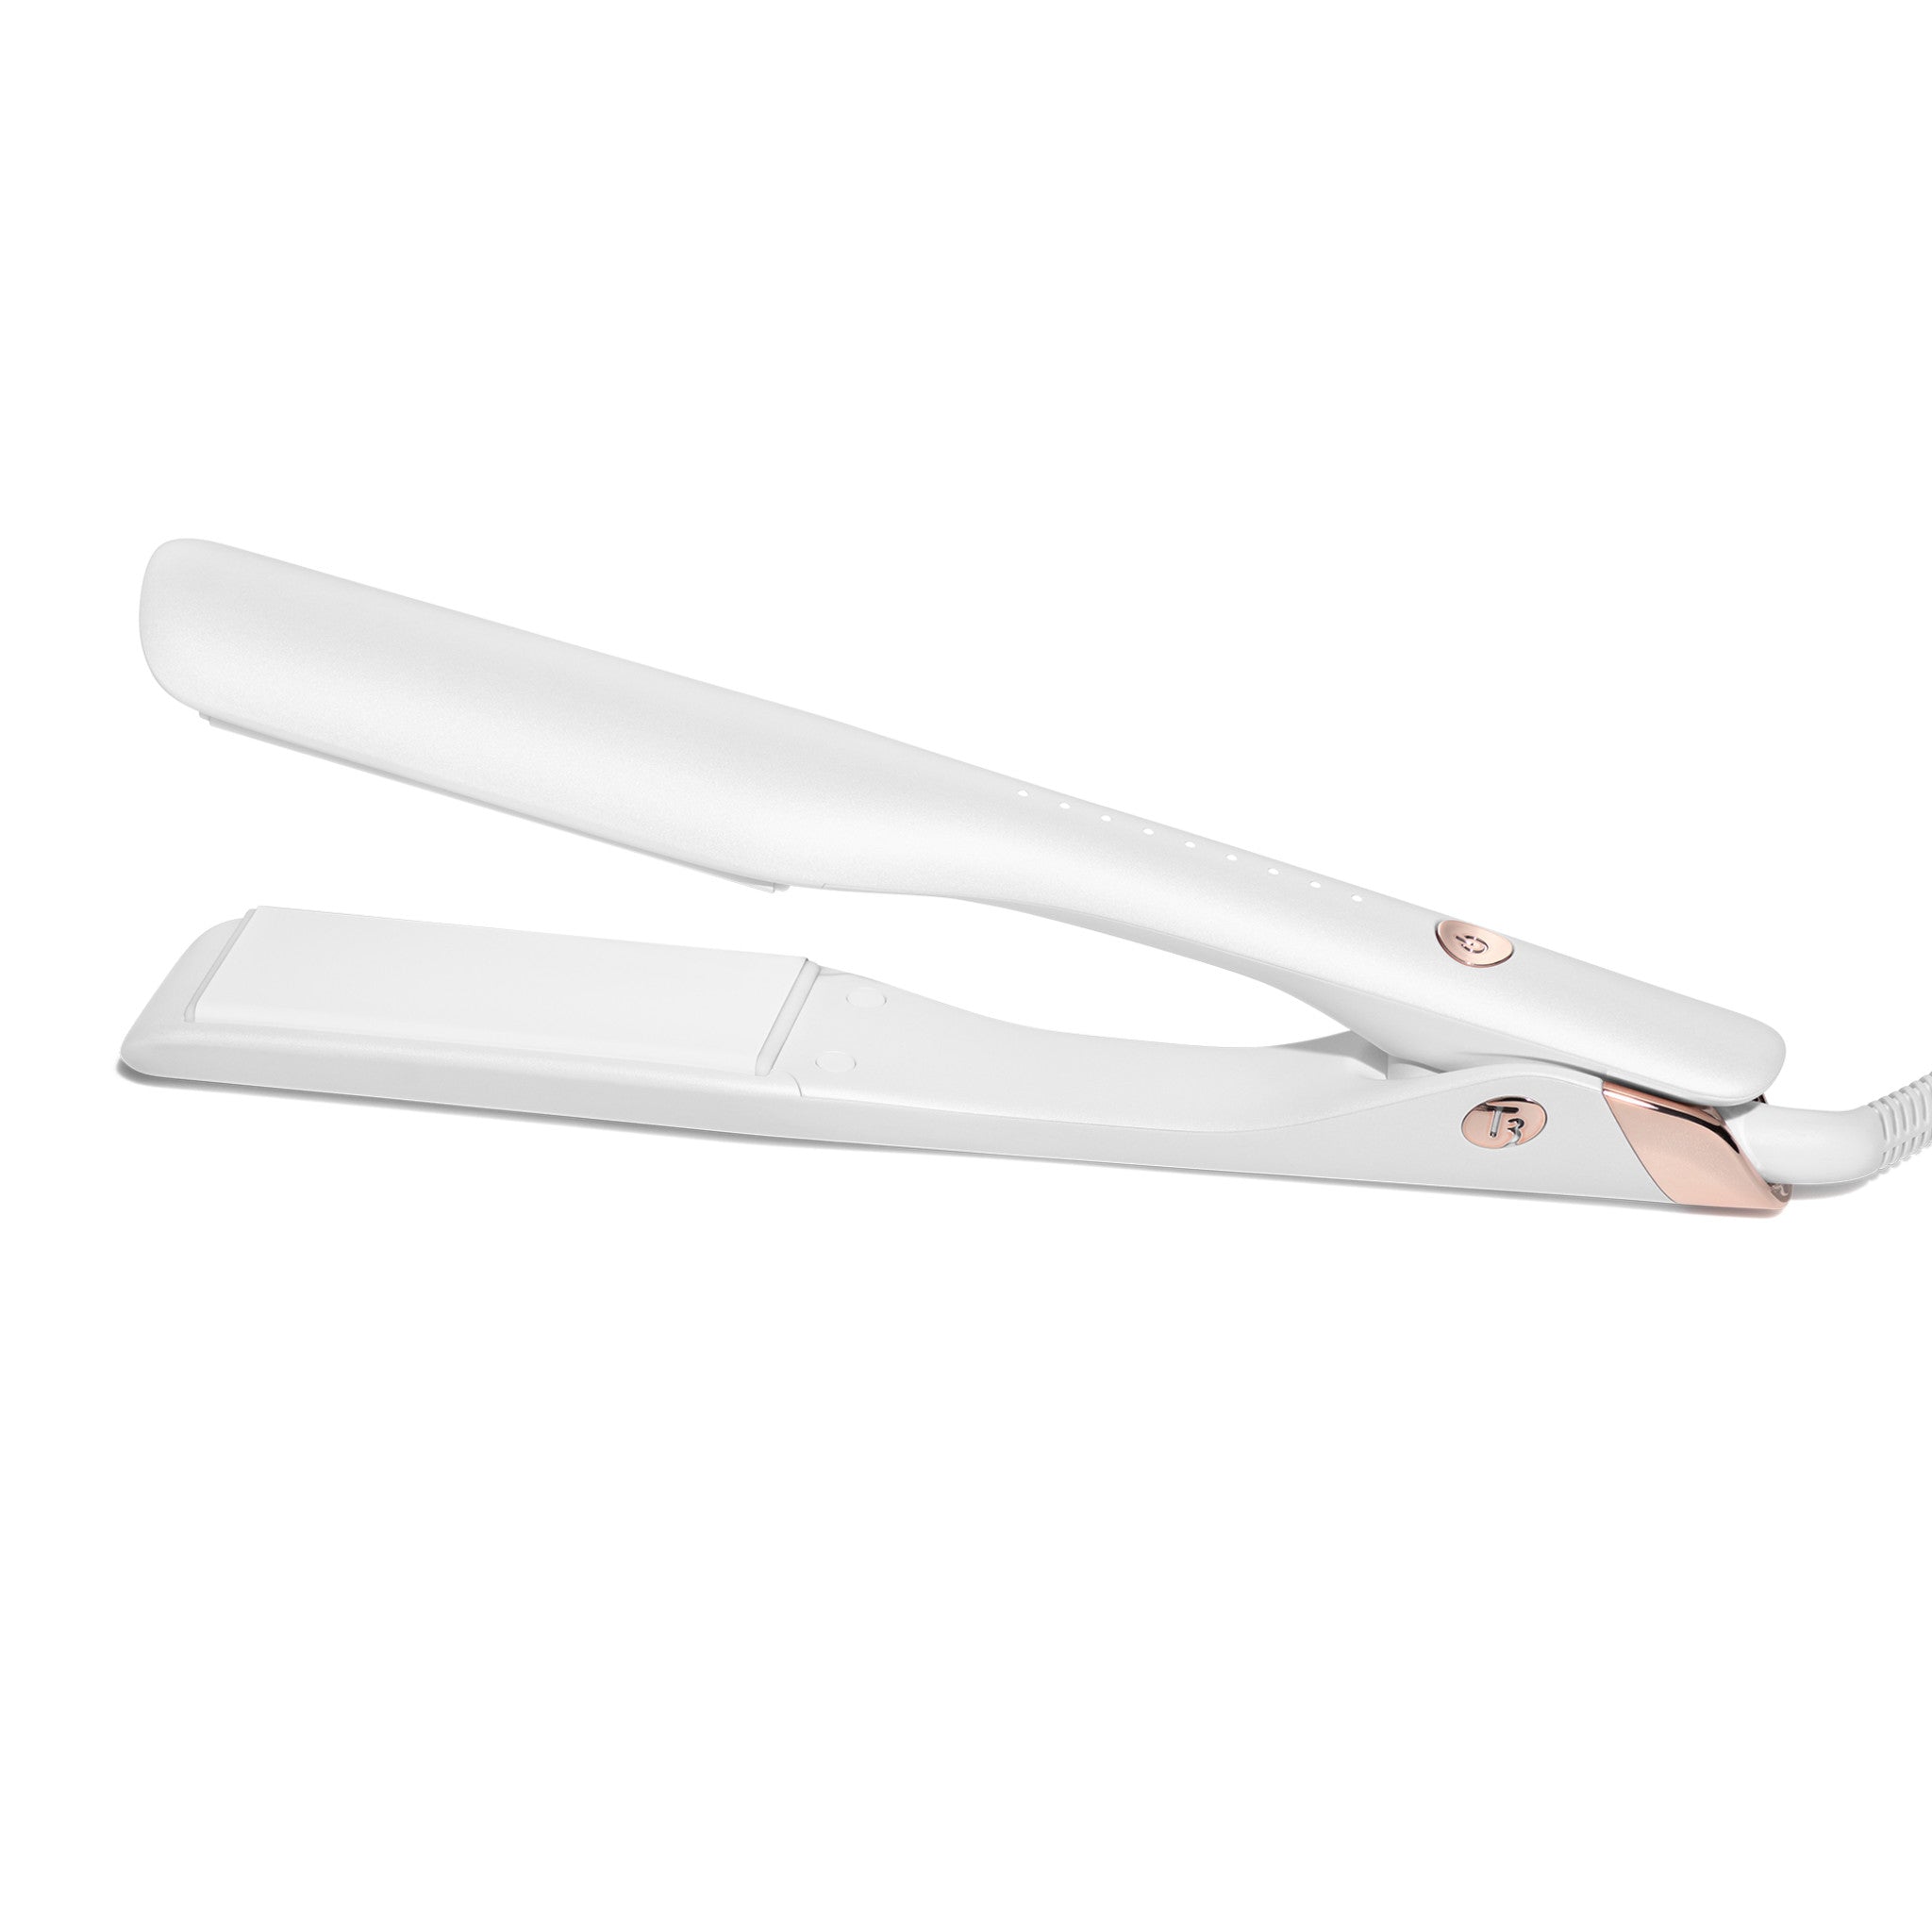 T3 Lucea 1.5” Professional Straightening and Styling Iron main image.